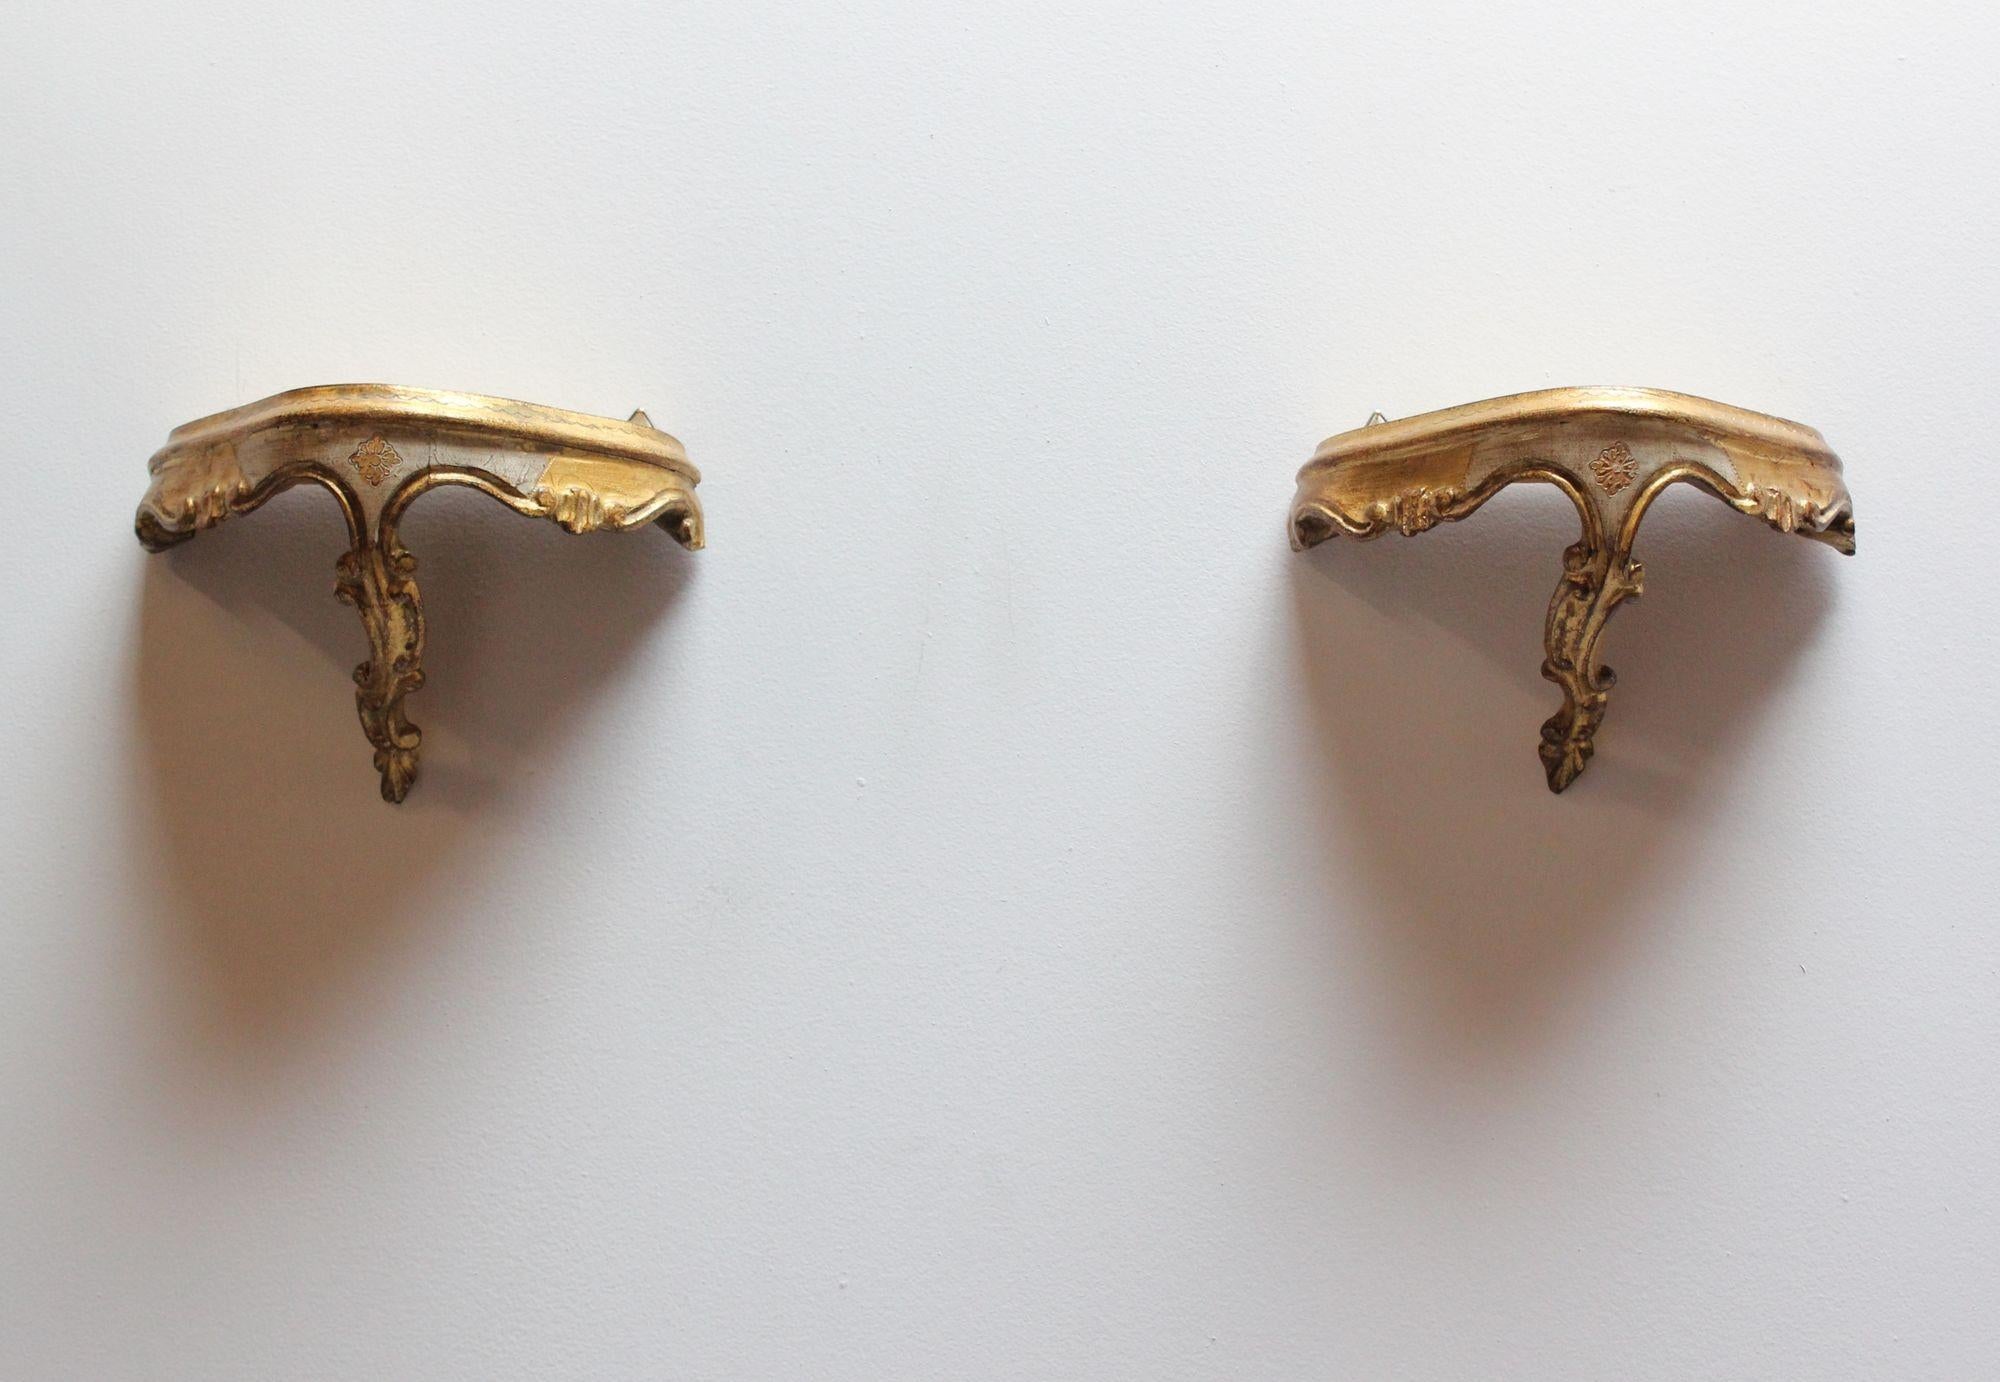 Pair of Vintage Florentine Giltwood Wall Brackets/Shelves with Rocaille Flourish For Sale 2